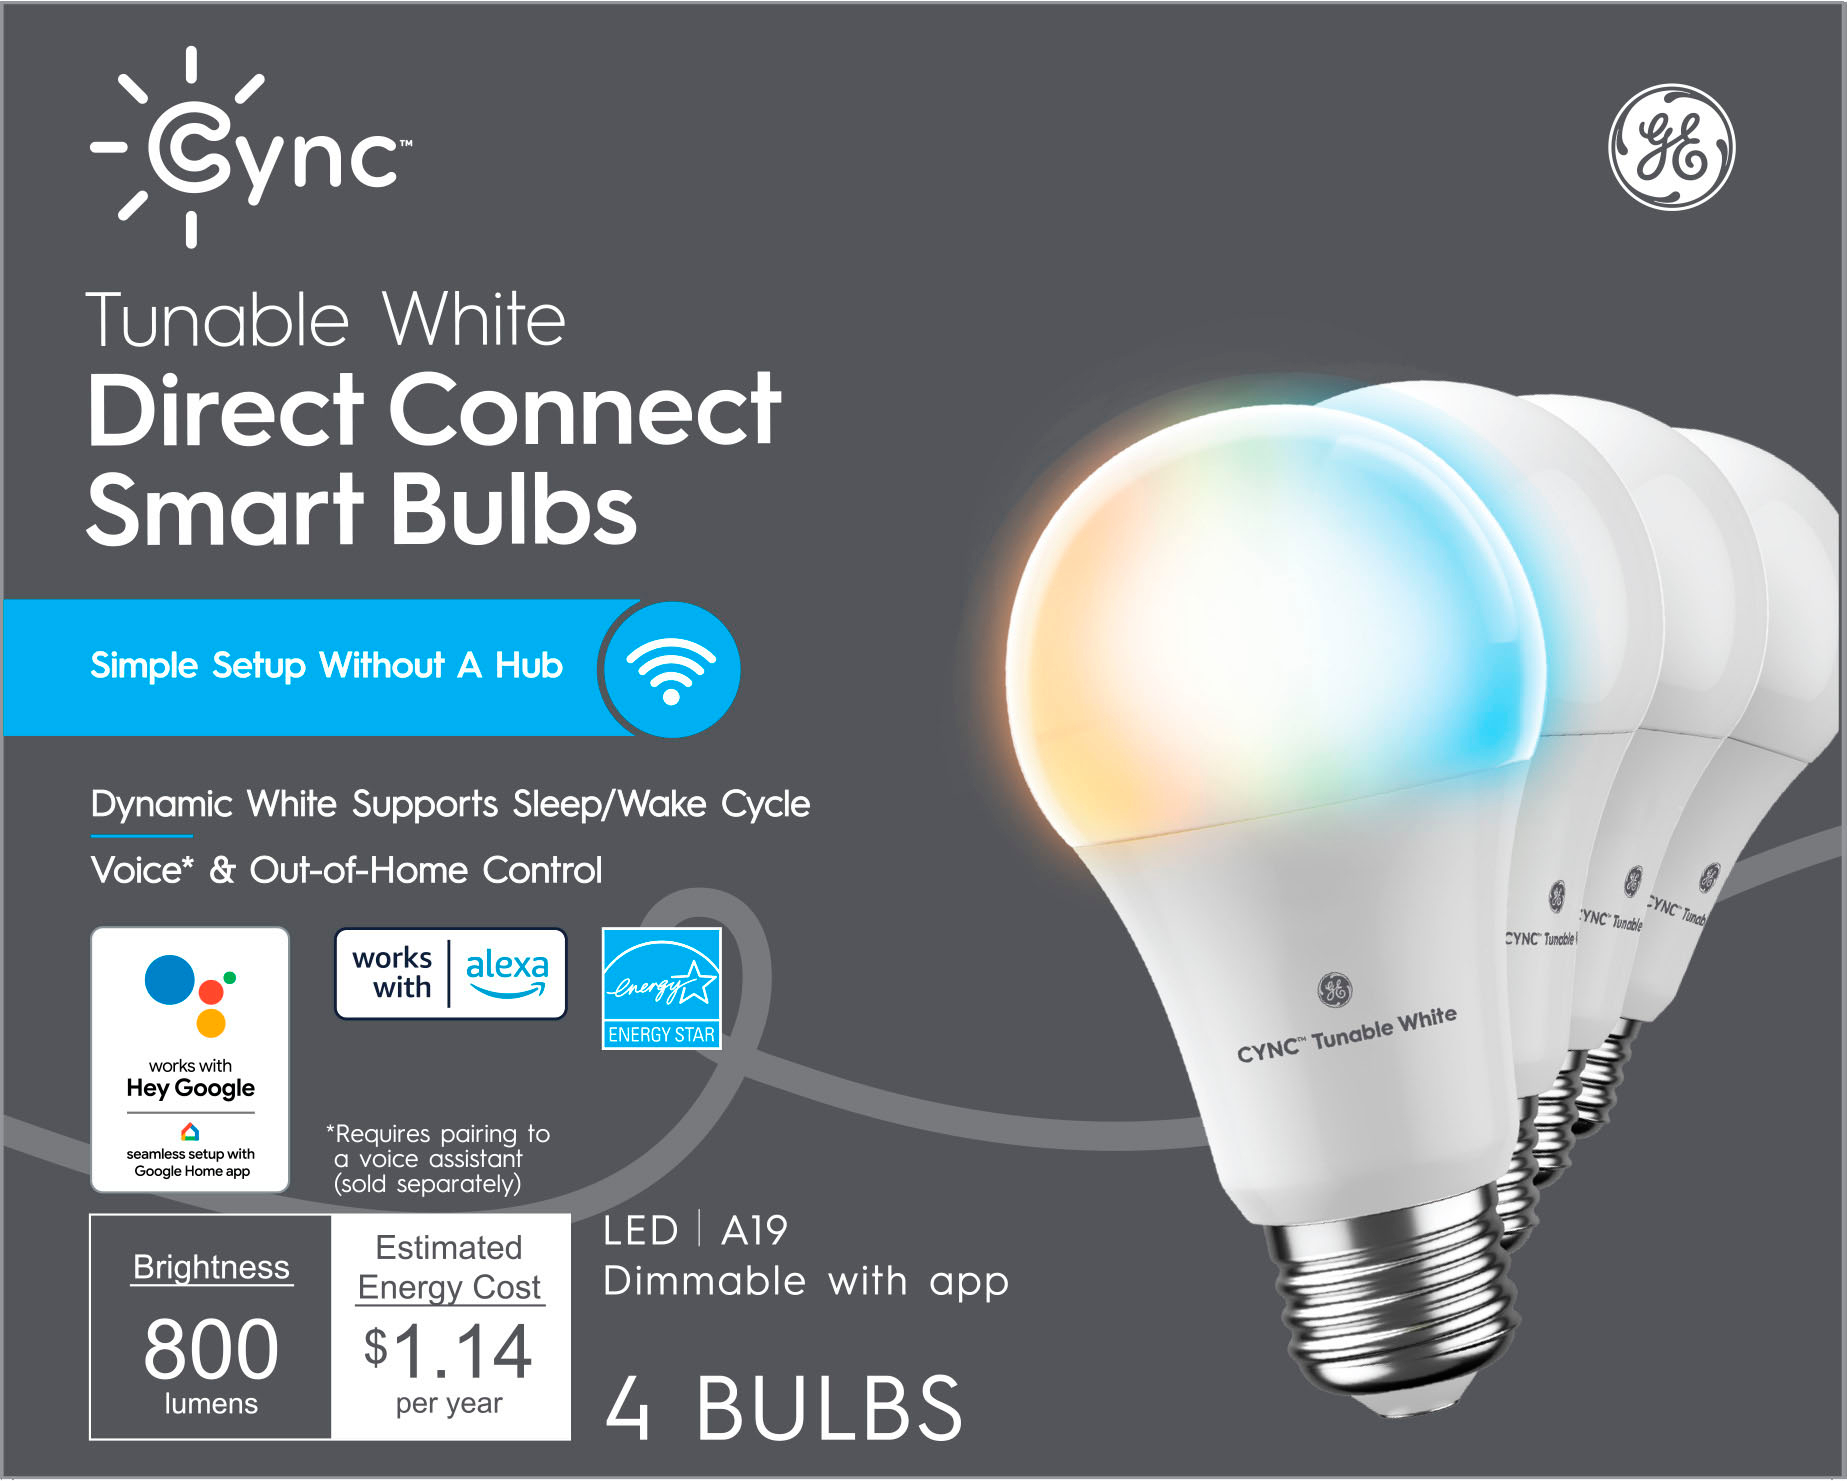 Tapo smart light bulbs are half price for Black Friday